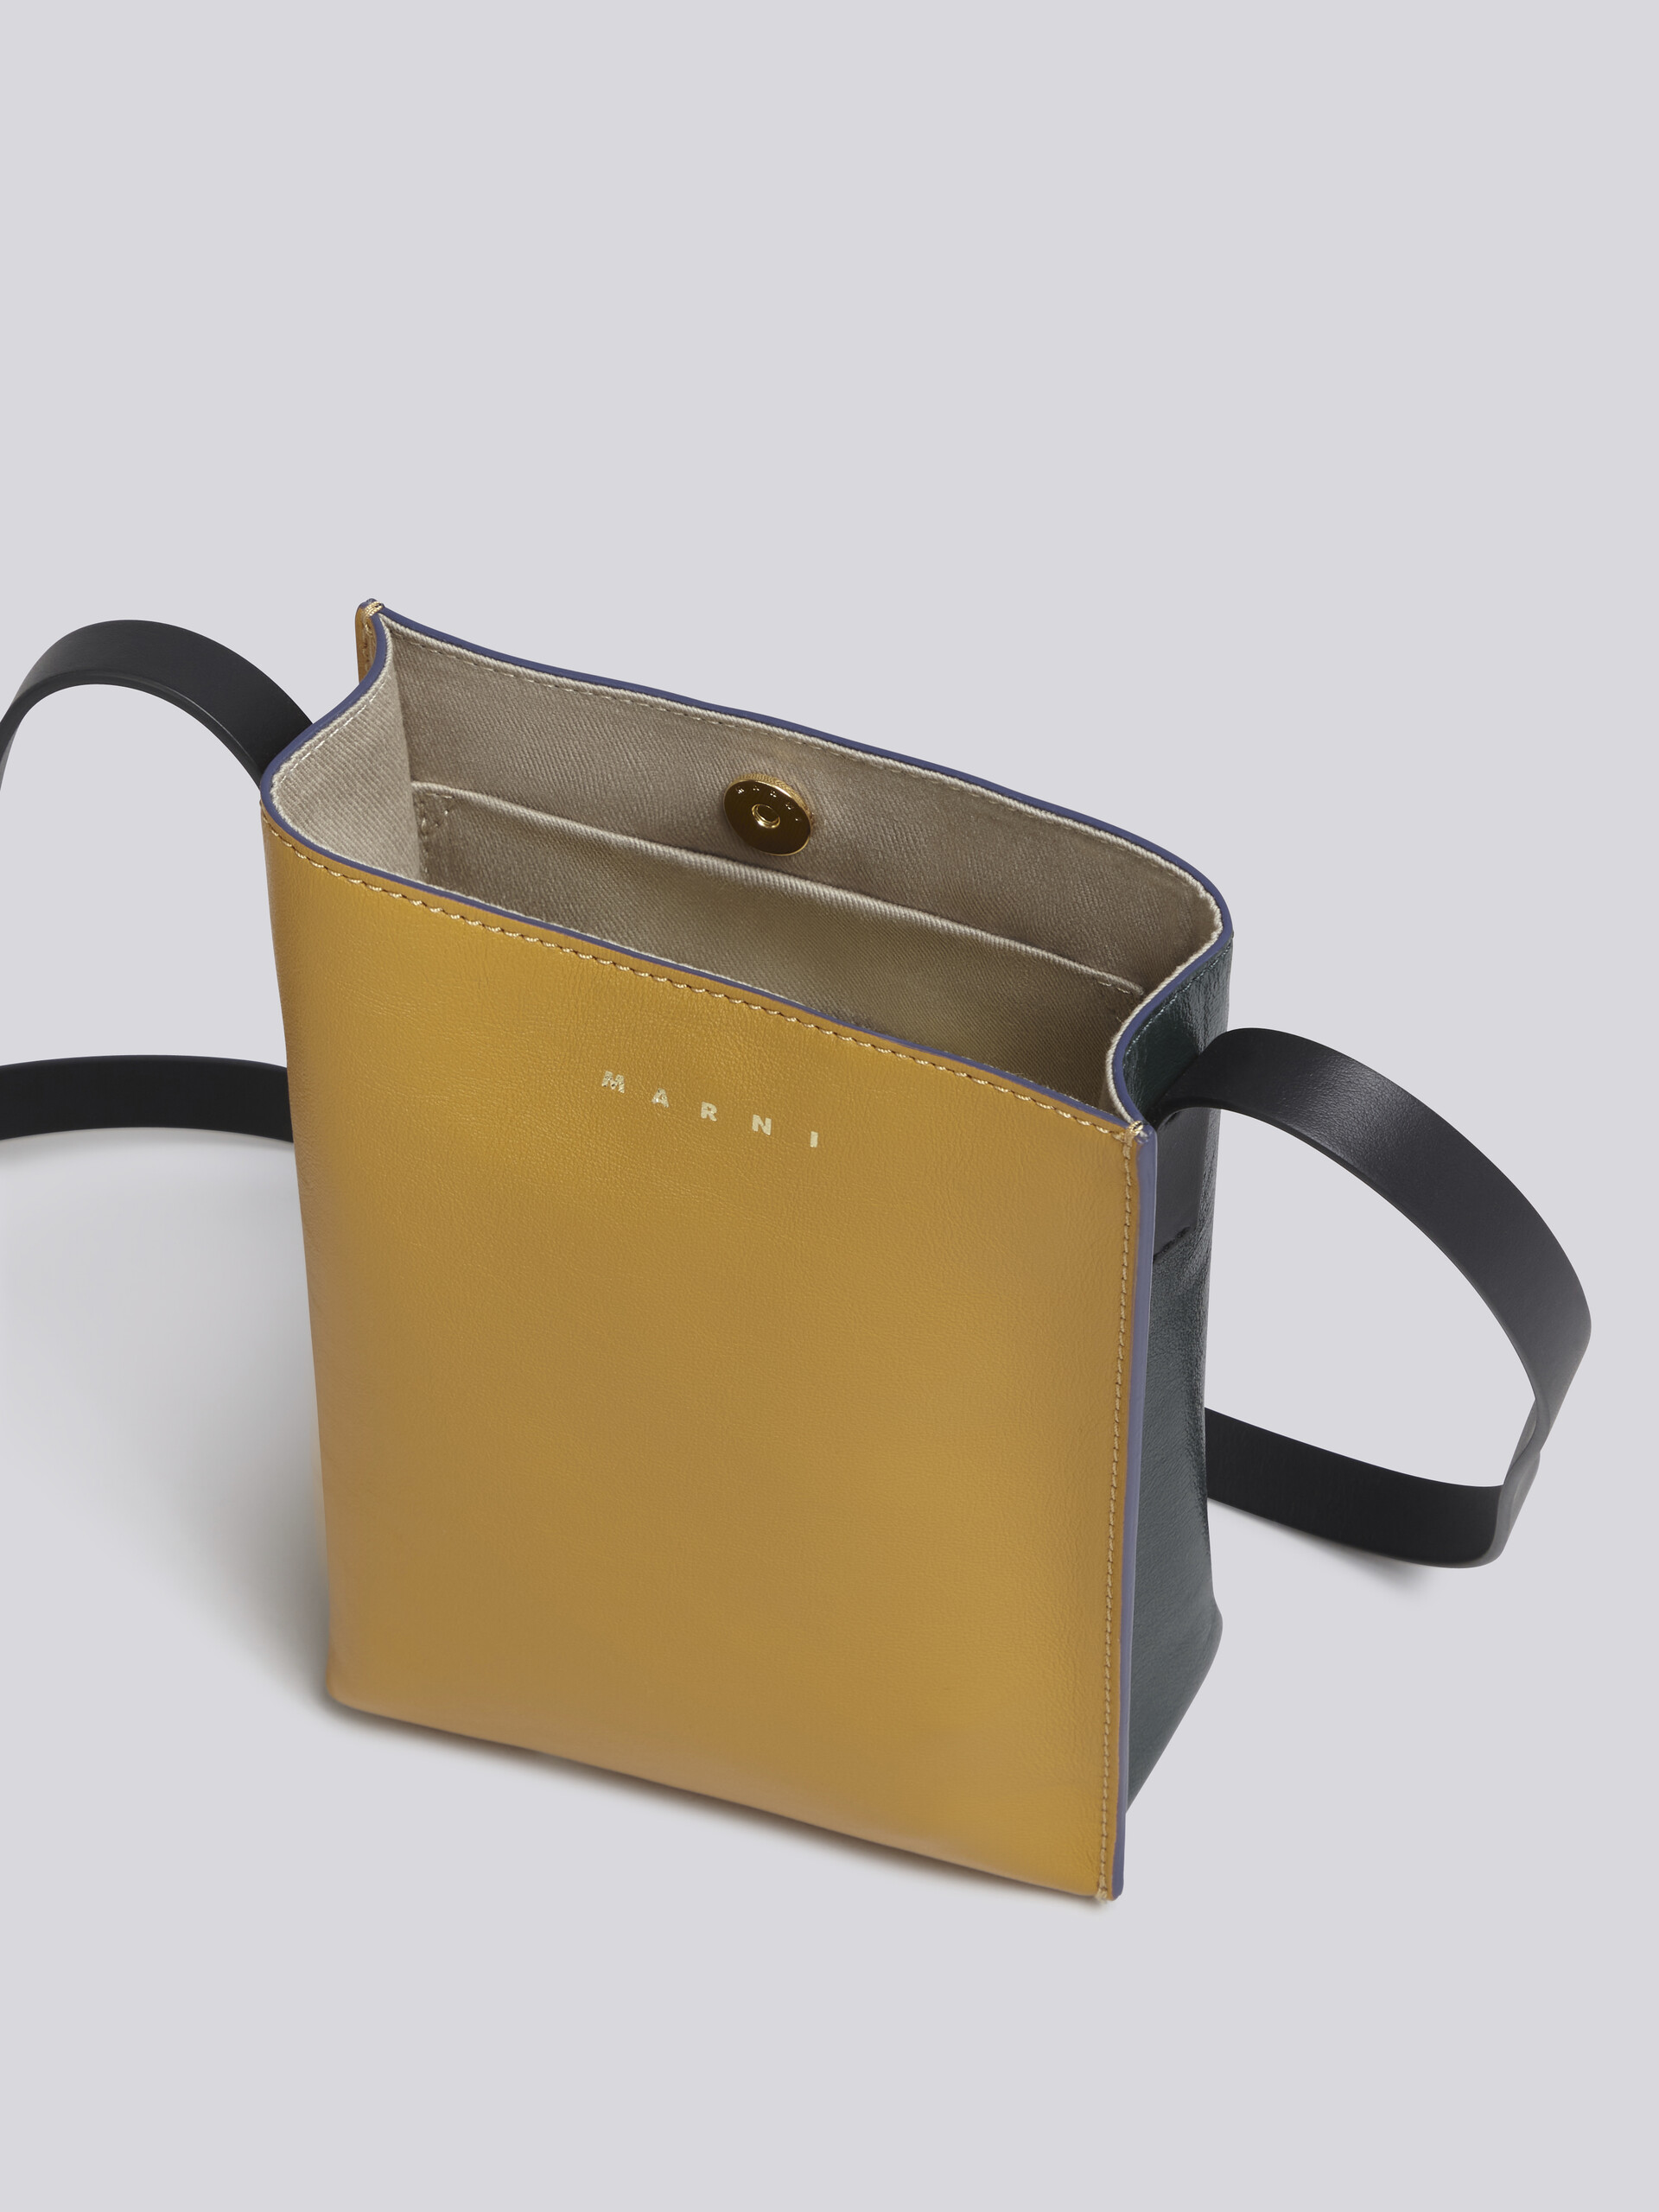 MUSEO SOFT bag in yellow and green tumbled calf - Shoulder Bags - Image 2